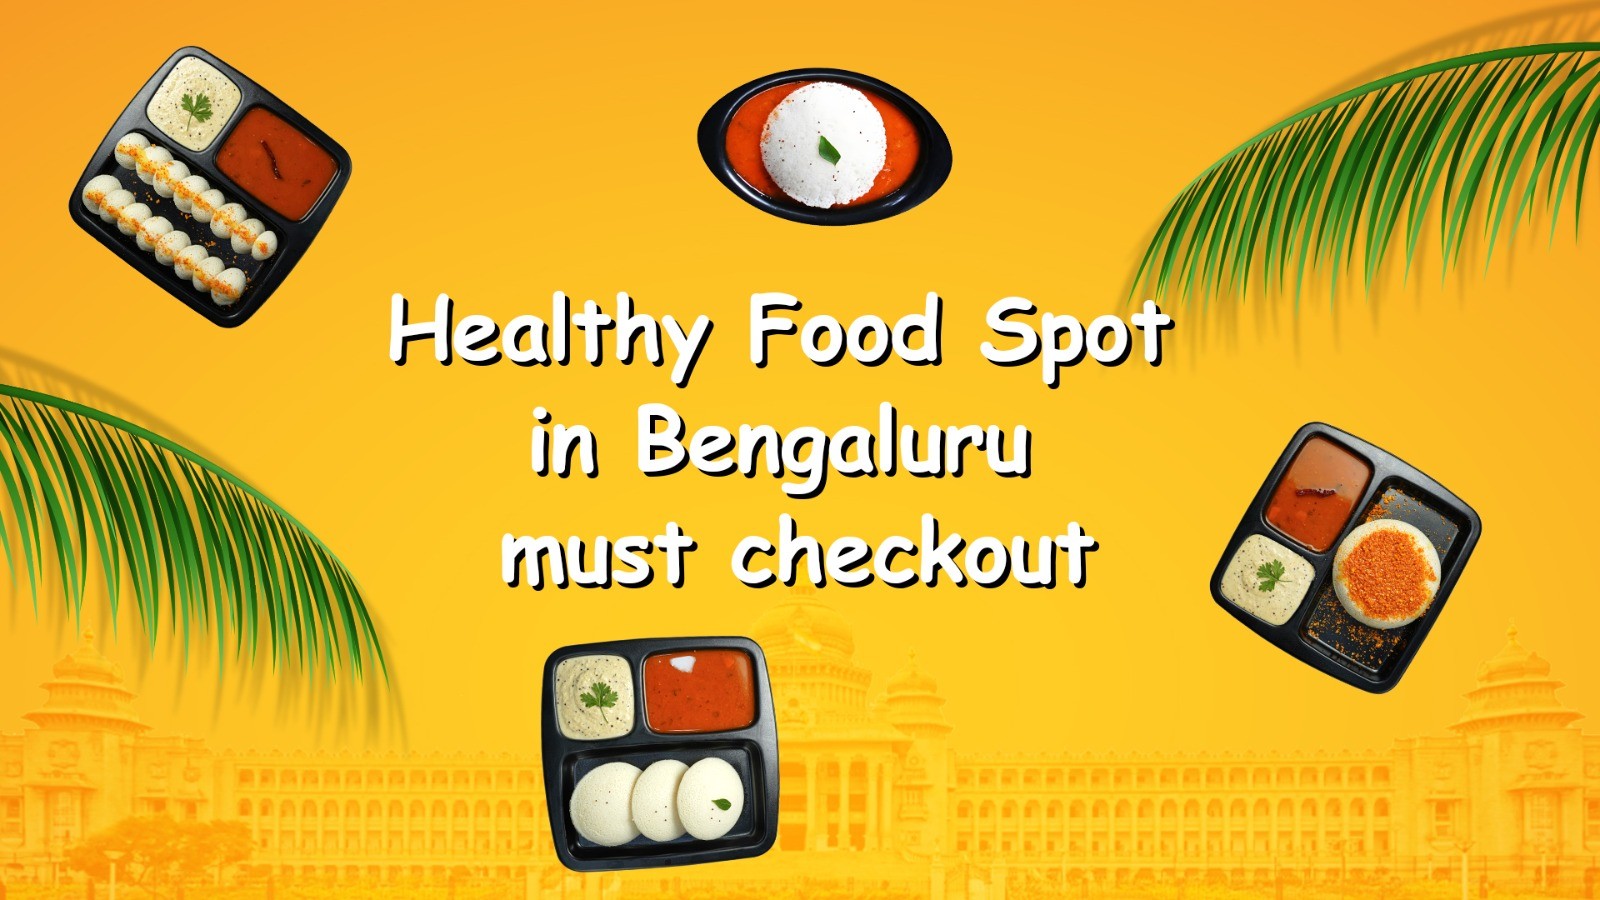 Healthy food spot in Bengaluru must checkout